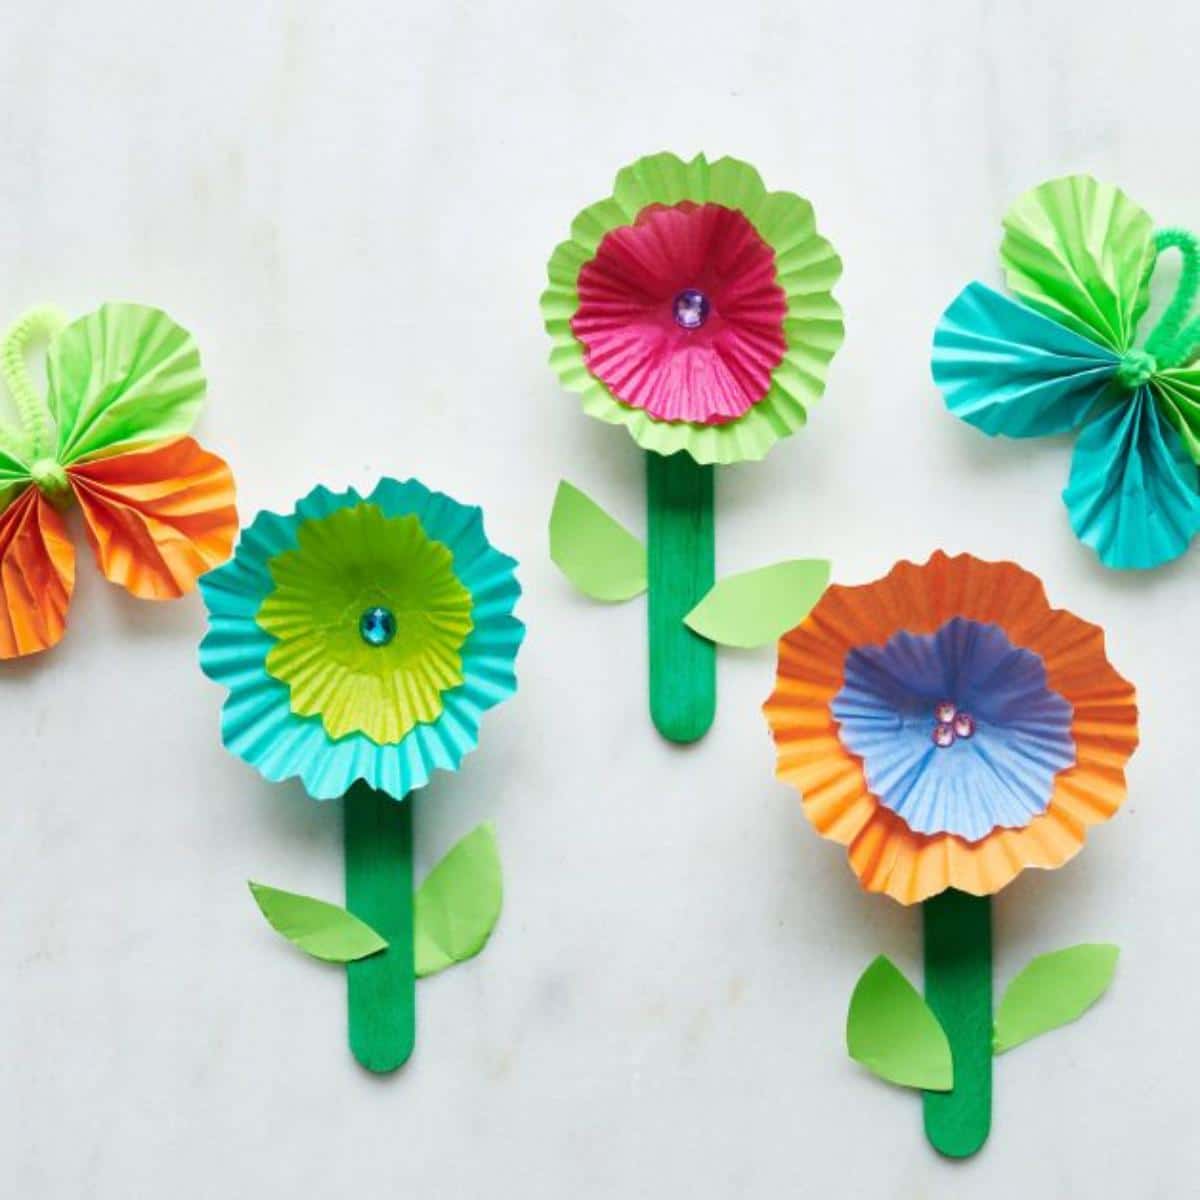 Butterfly and Flower Cupcake Liner Crafts